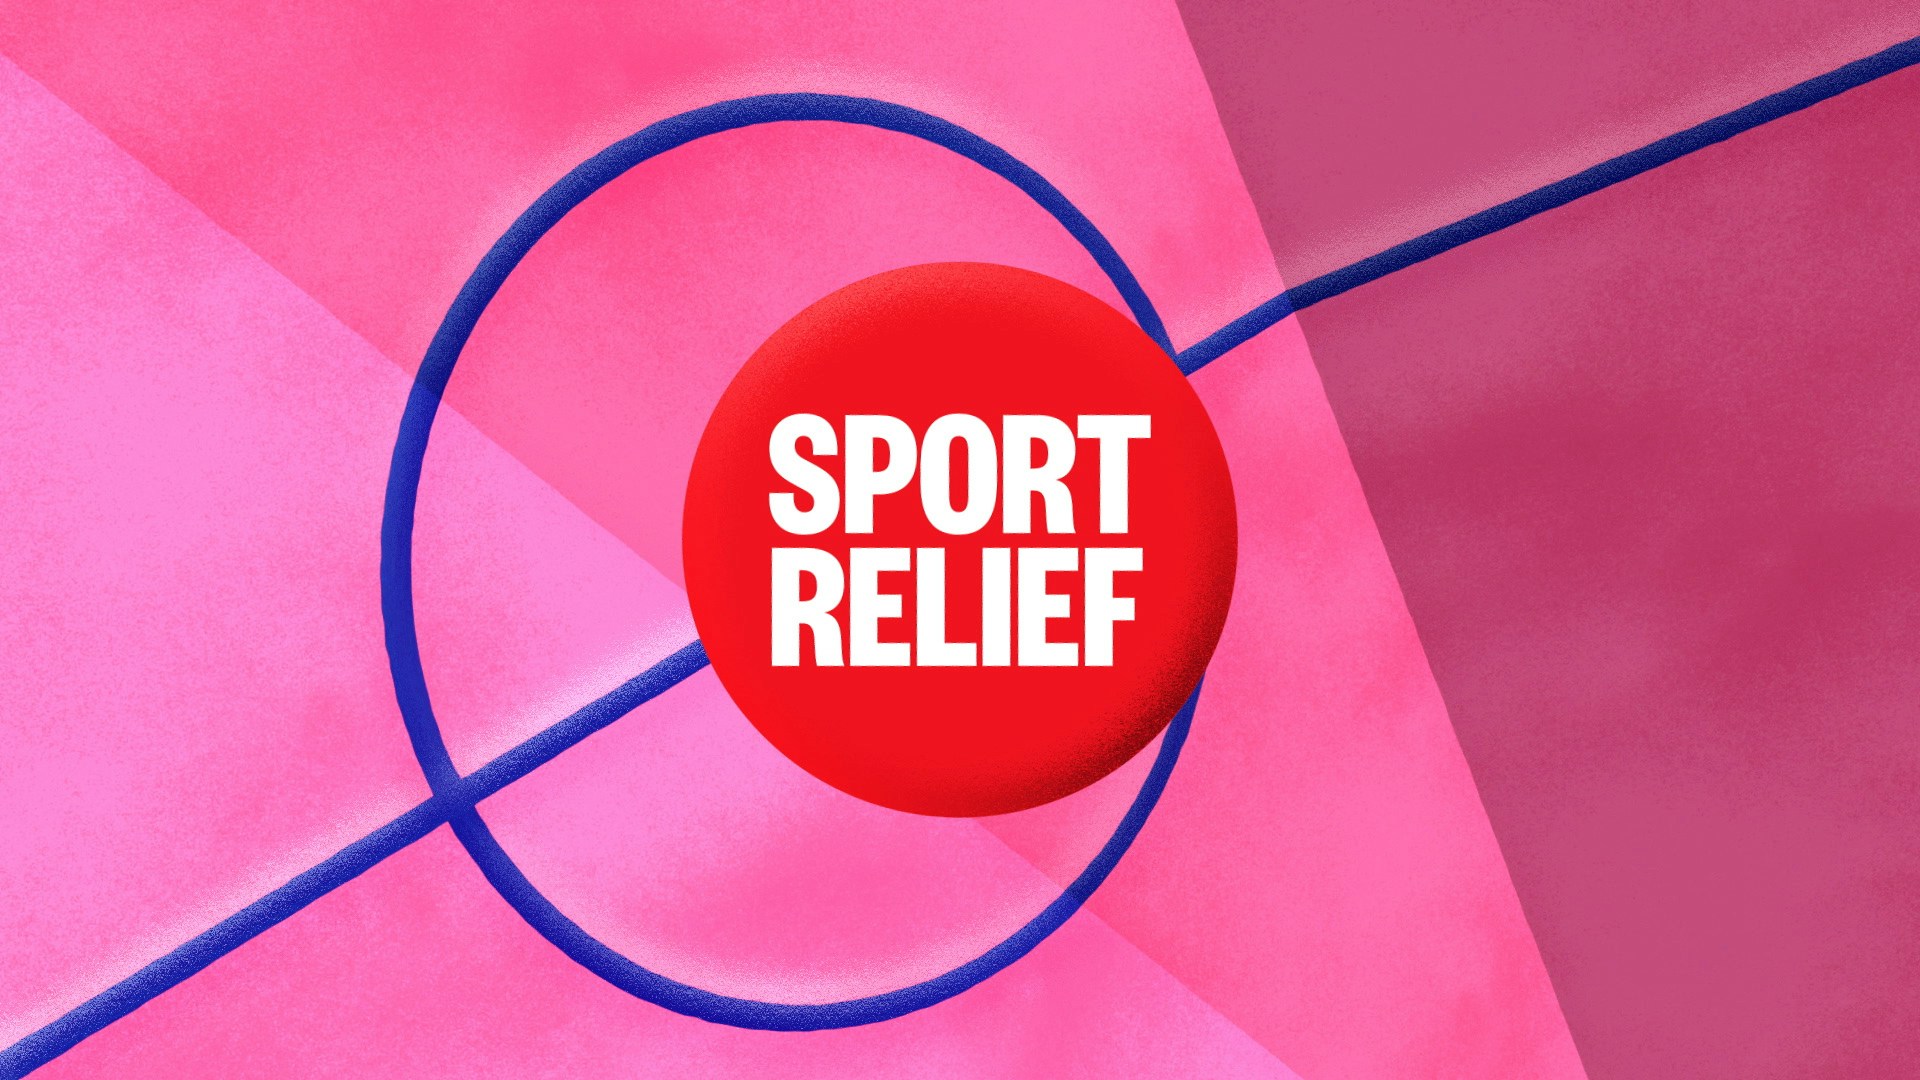 Sports relief 2020 Title design pink with blue lines